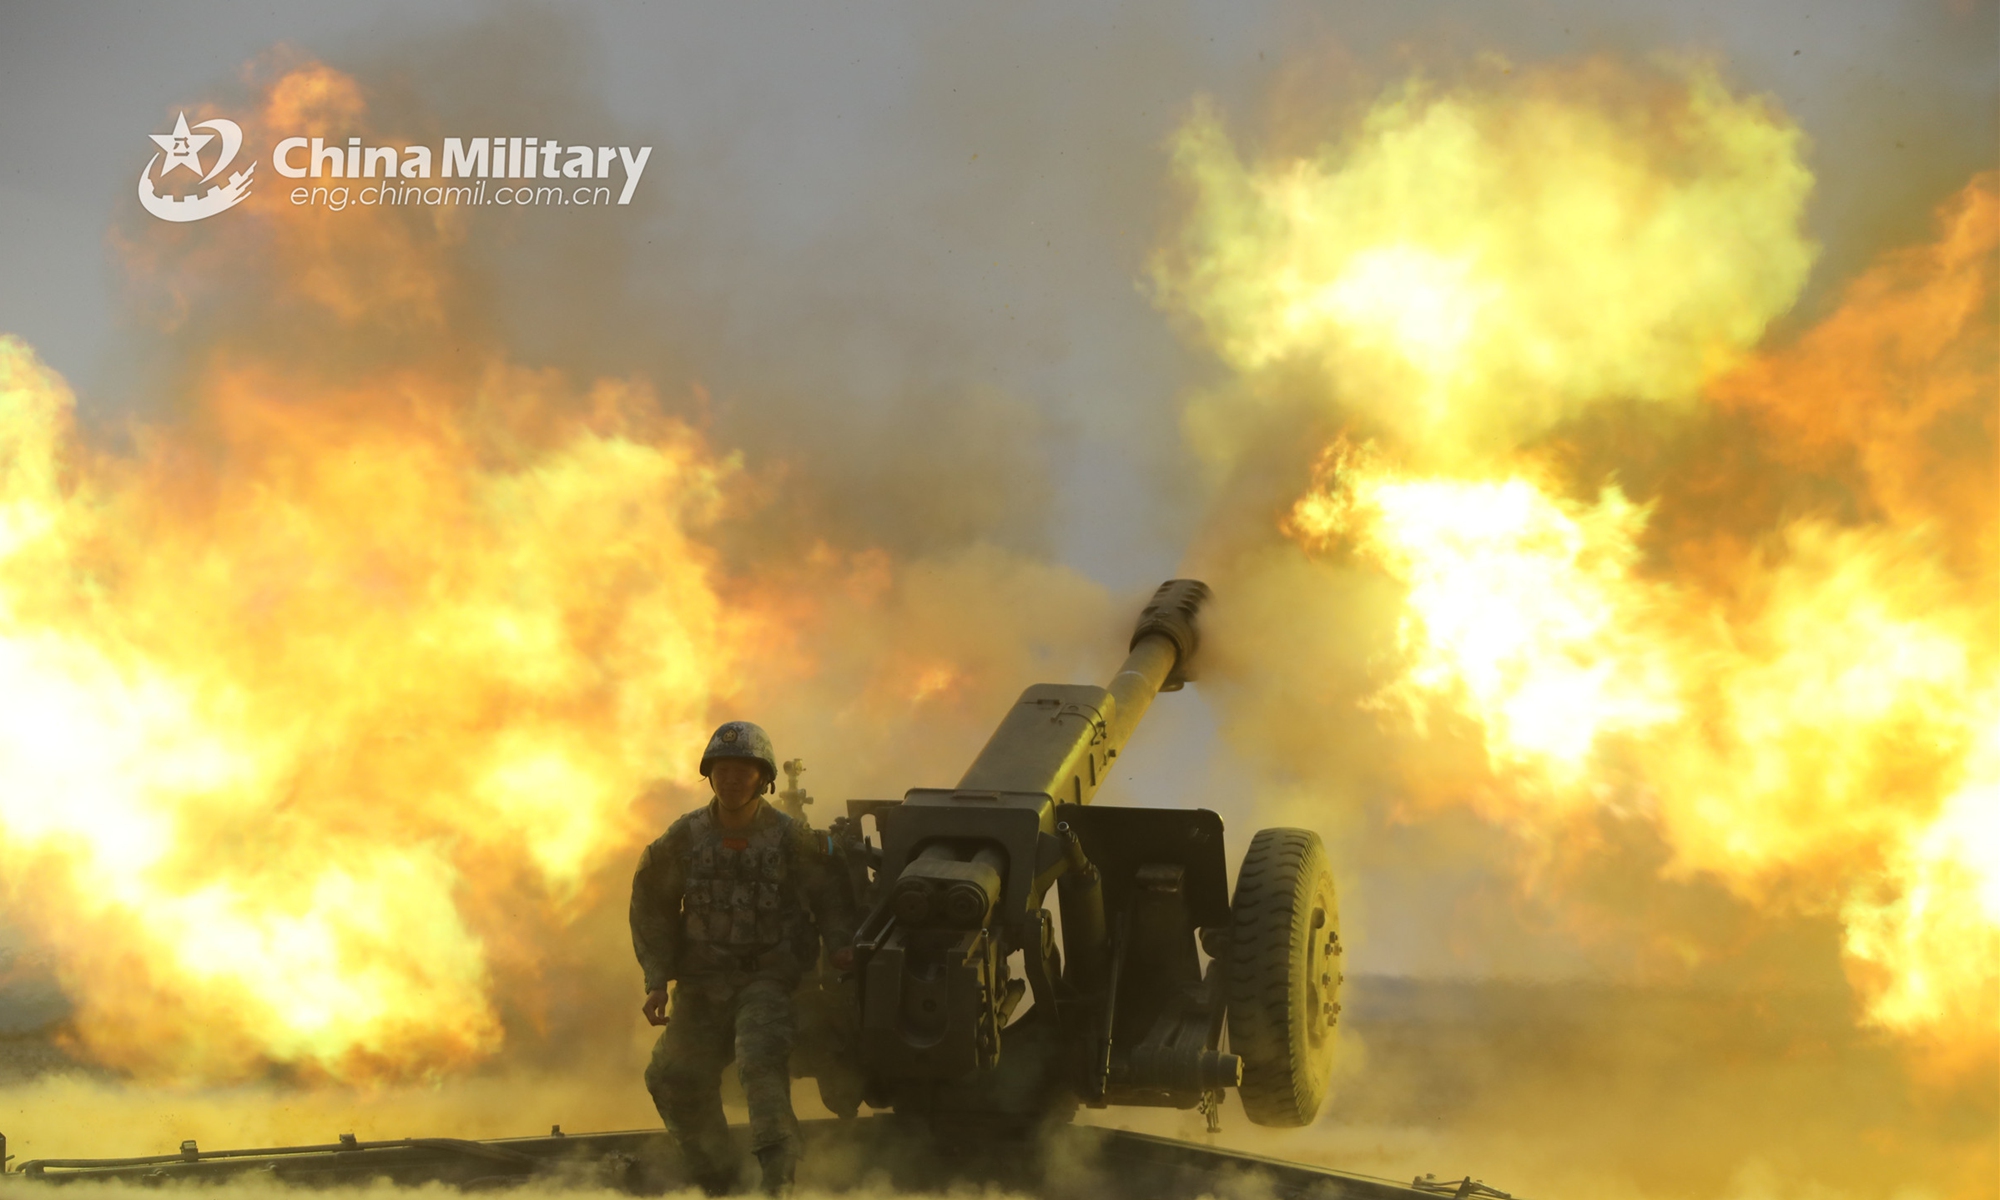 An artilleryman assigned to a brigade of the PLA Air Force airborne troops fires the towed howitzer during a live-firing assessment of the artillery element on July 20, 2022. (eng.chinamil.com.cn/Photo by Feng Shunli and Su Feng)